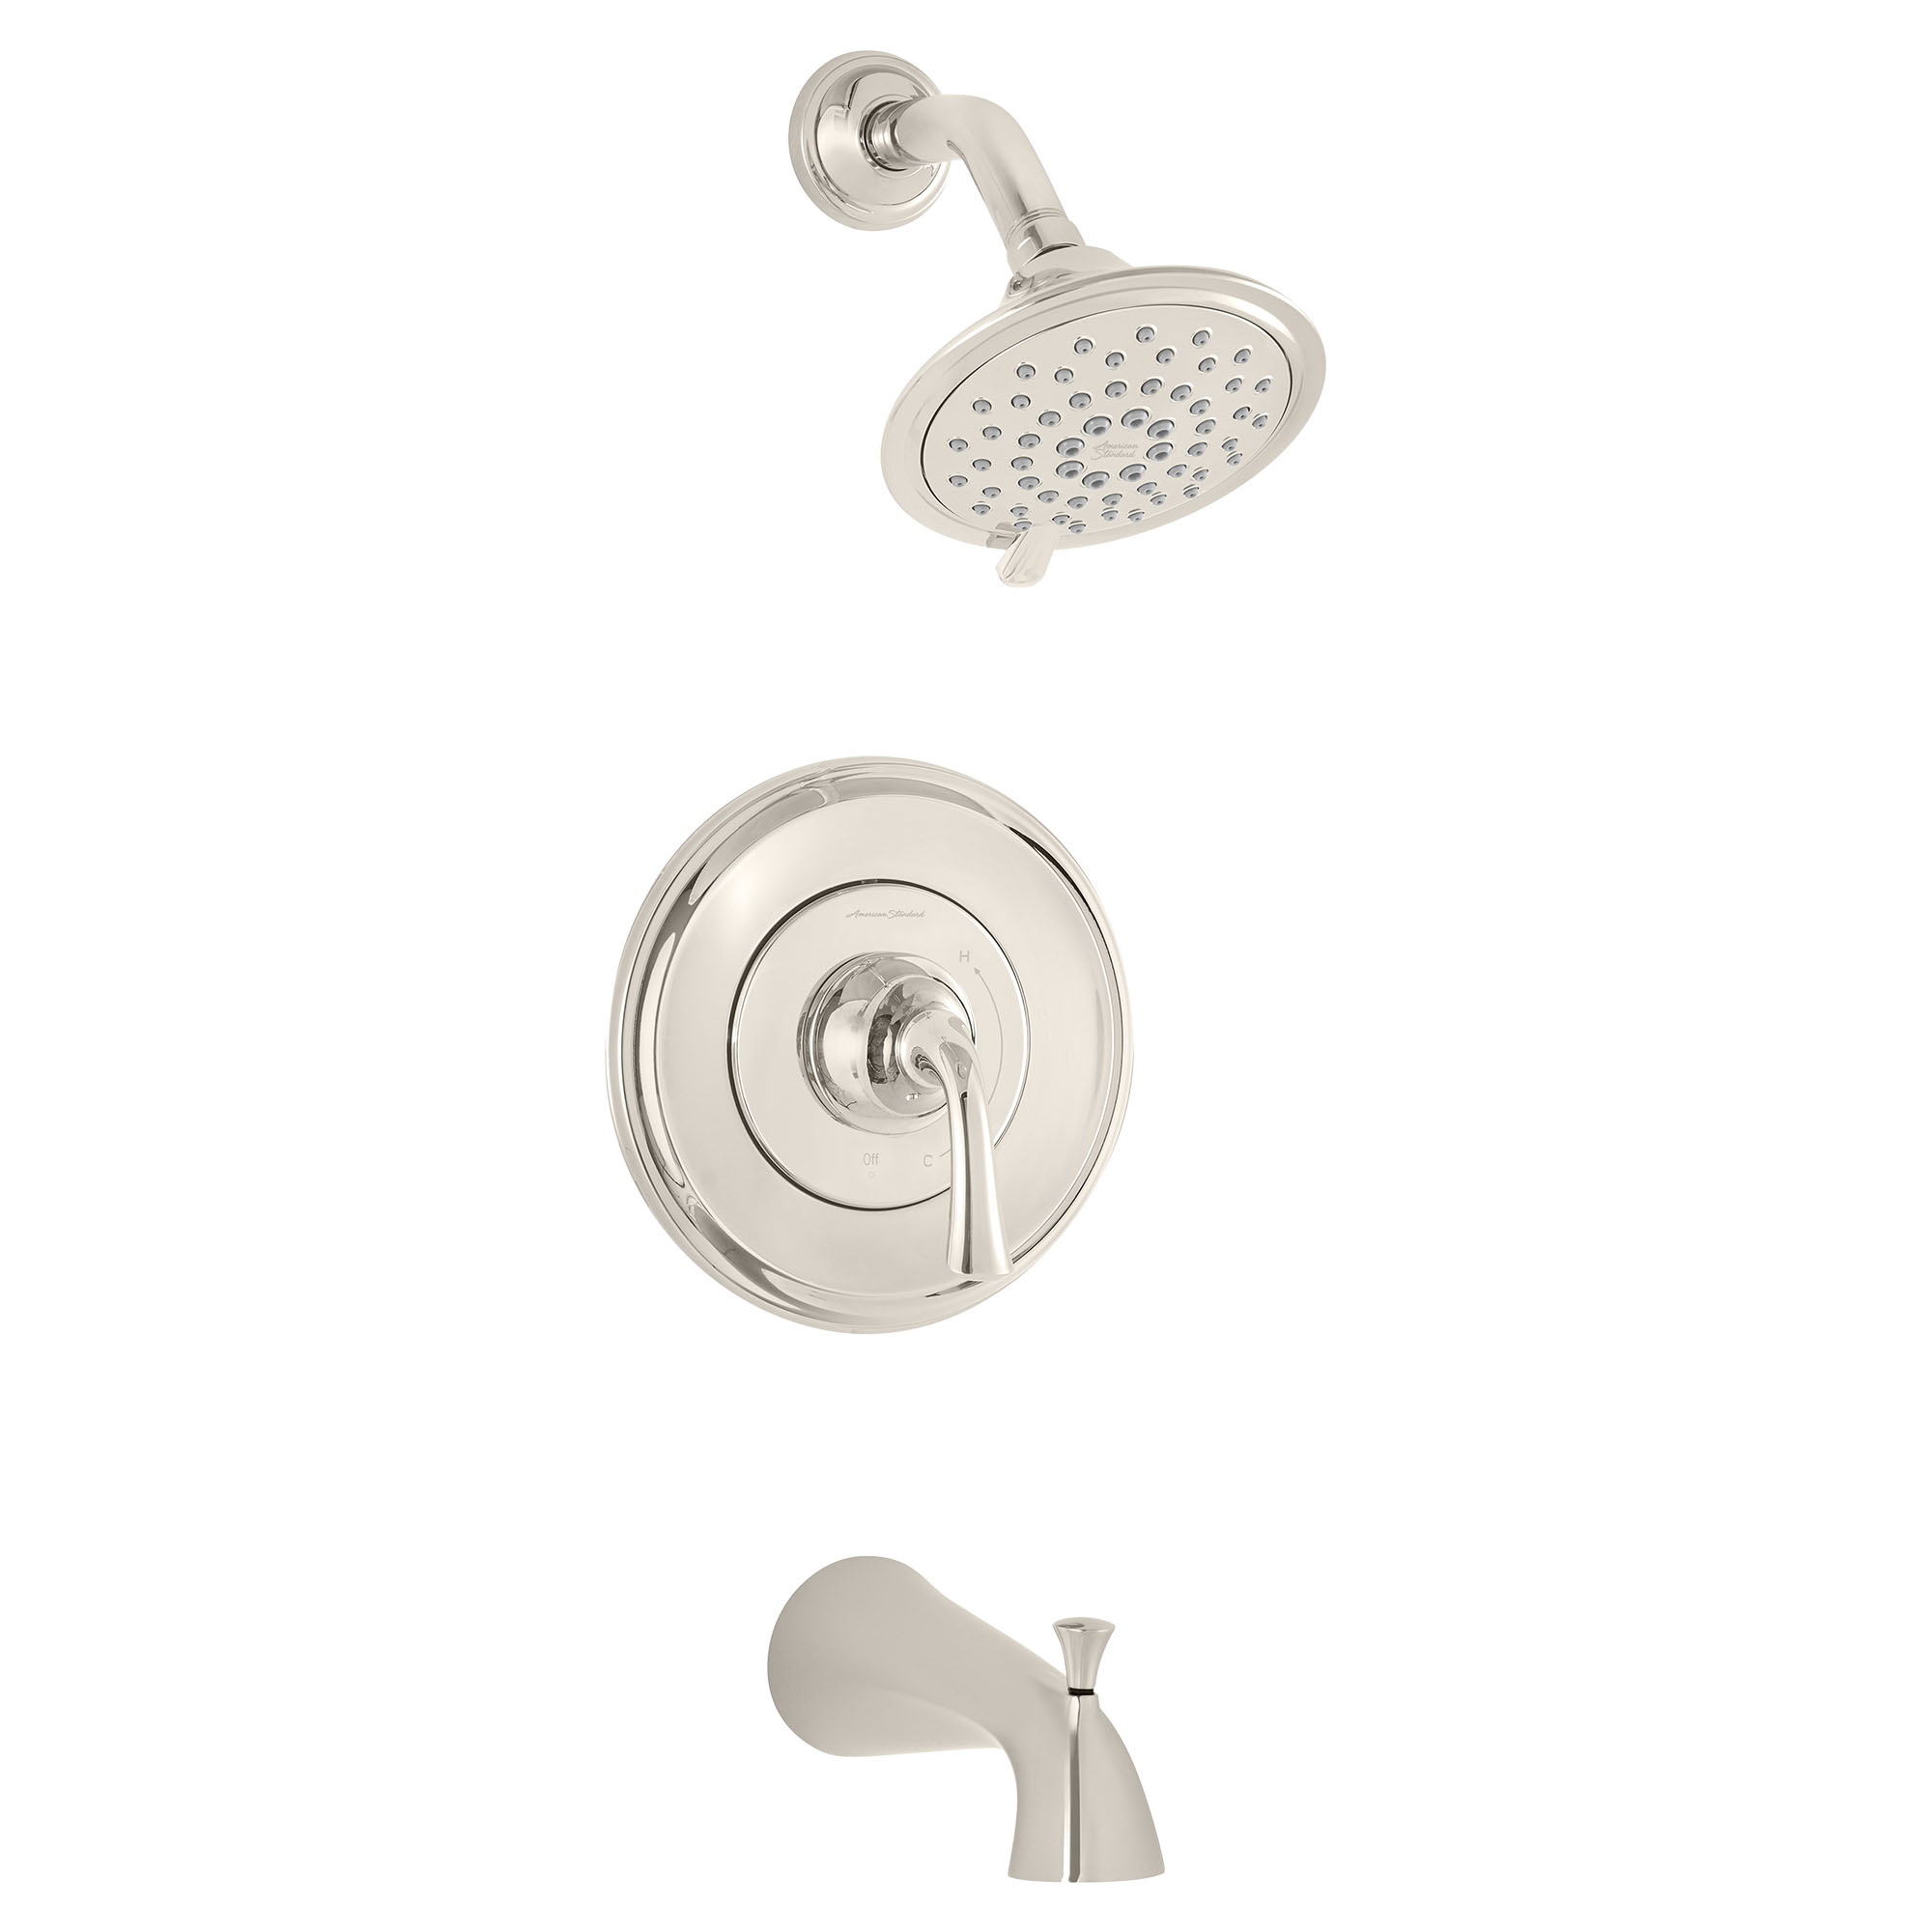 Patience® 1.8 gpm/6.6 L/min Tub and Shower Trim Kit With Water-Saving 3-Function Showerhead, Double Ceramic Pressure Balance Cartridge With Lever Handle